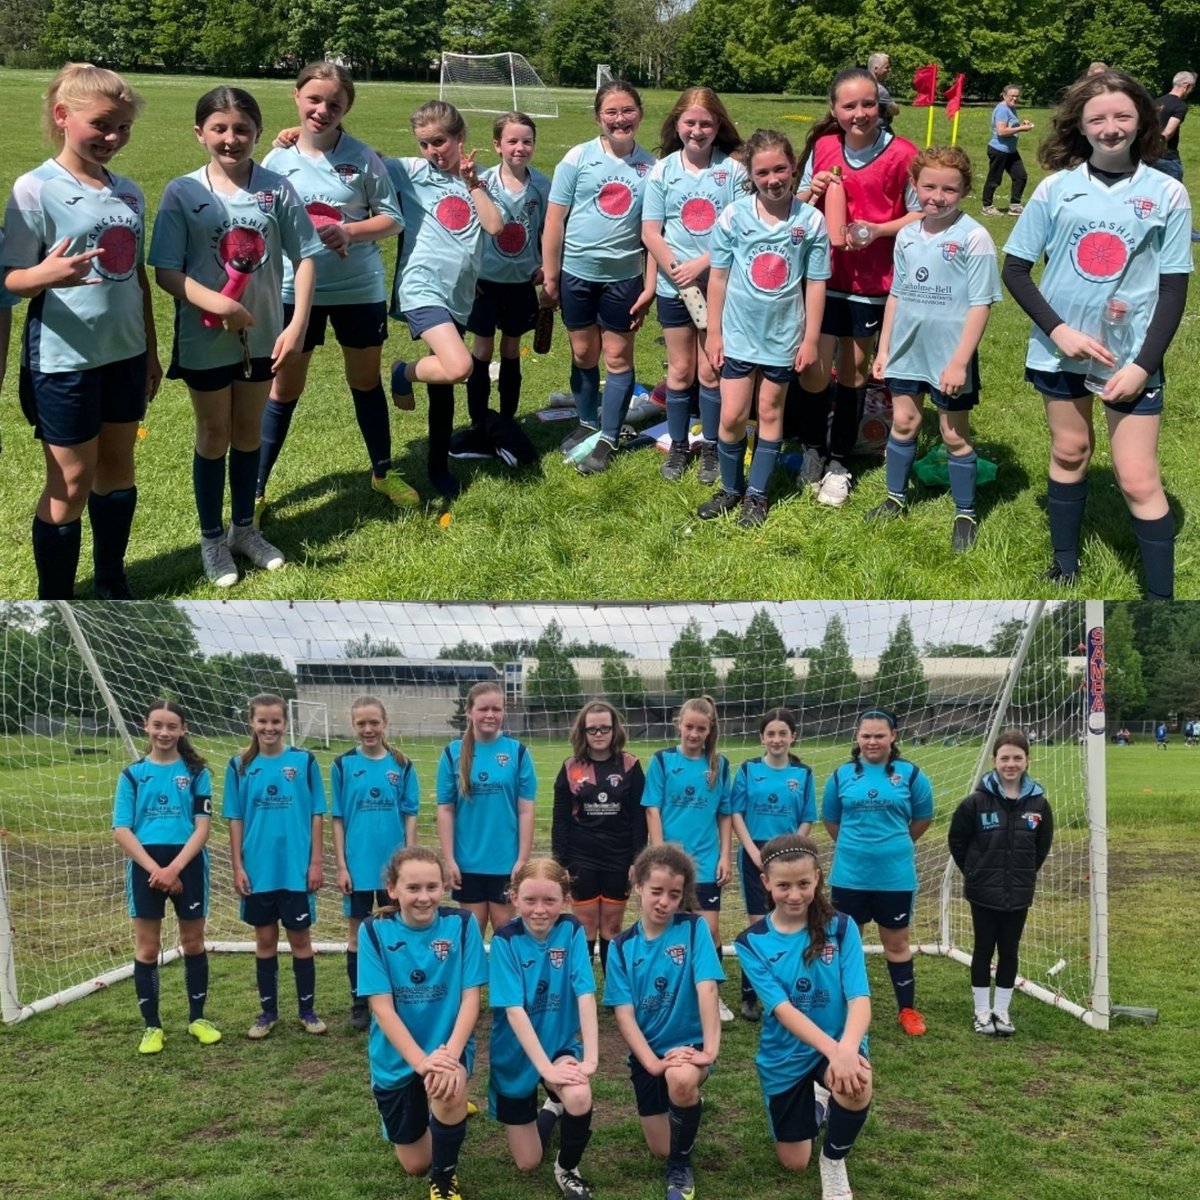 Thanks to @FyldeCoastSoccr & @wldjfc for todays friendlies. Two good matches & nice to see our u11s blues & u12s still committed & determined after a long season.
@JfcLancon 
@LFAWG
@PdplGirls
@GirlsFootballNw
@AGangaidzo
@CareSandcastle
@studholmebell
@charleyy_96
#lanconforlife